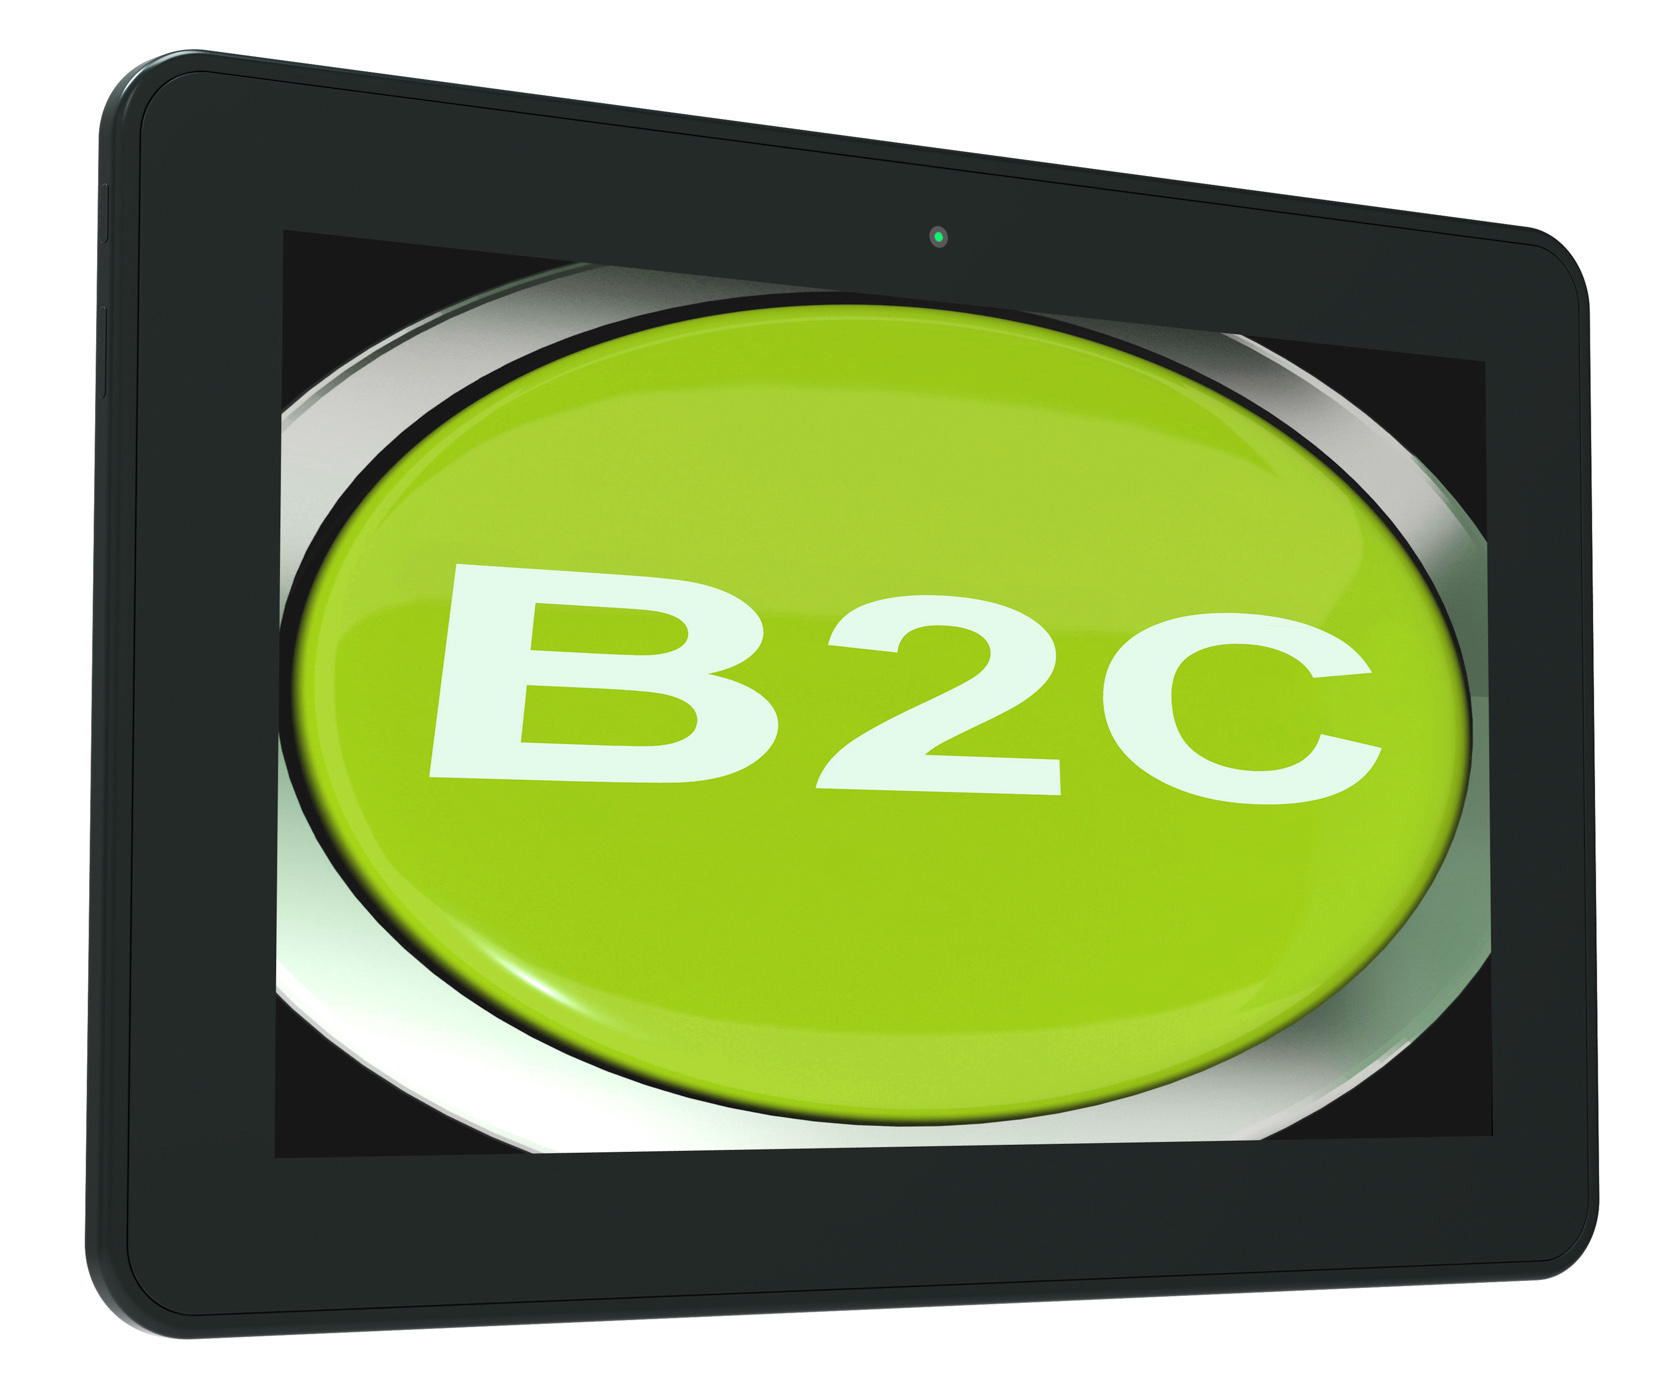 B2c tablet means business to consumer buying or selling photo